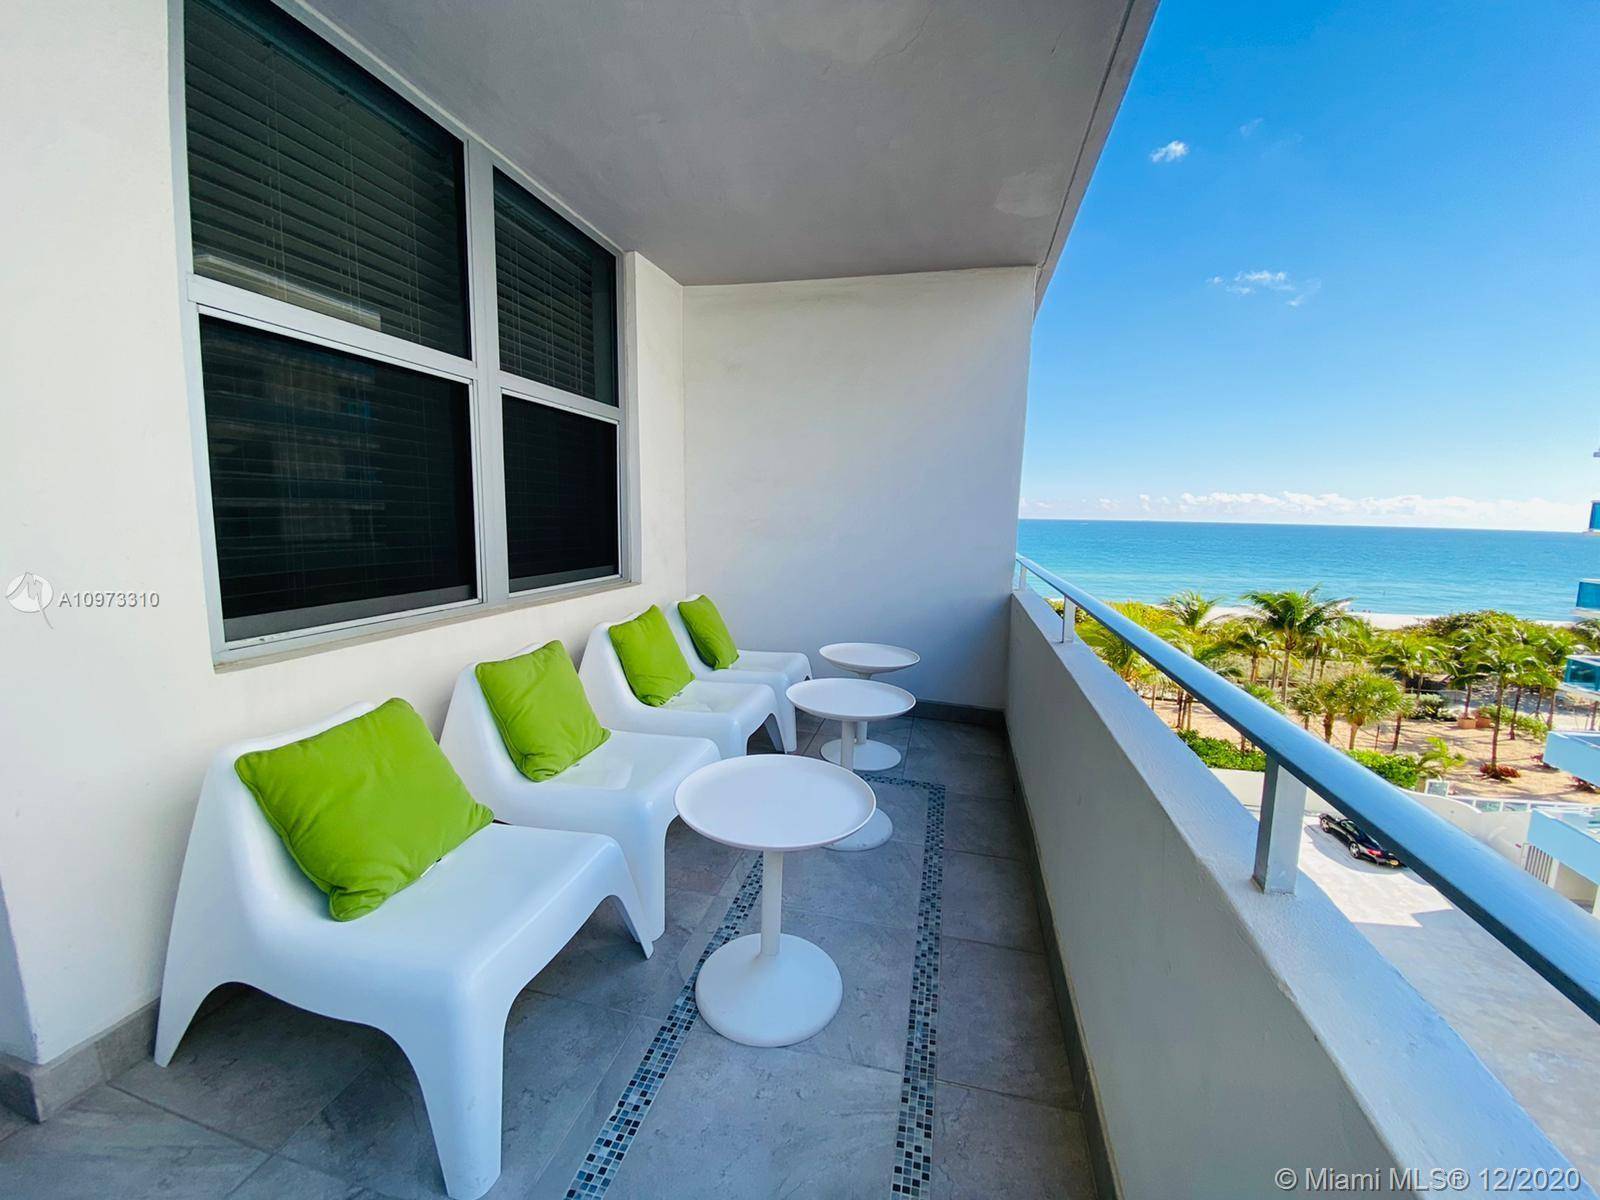 Beautiful beachfront condo, fully remodeled and furnished, ready for you to enjoy !